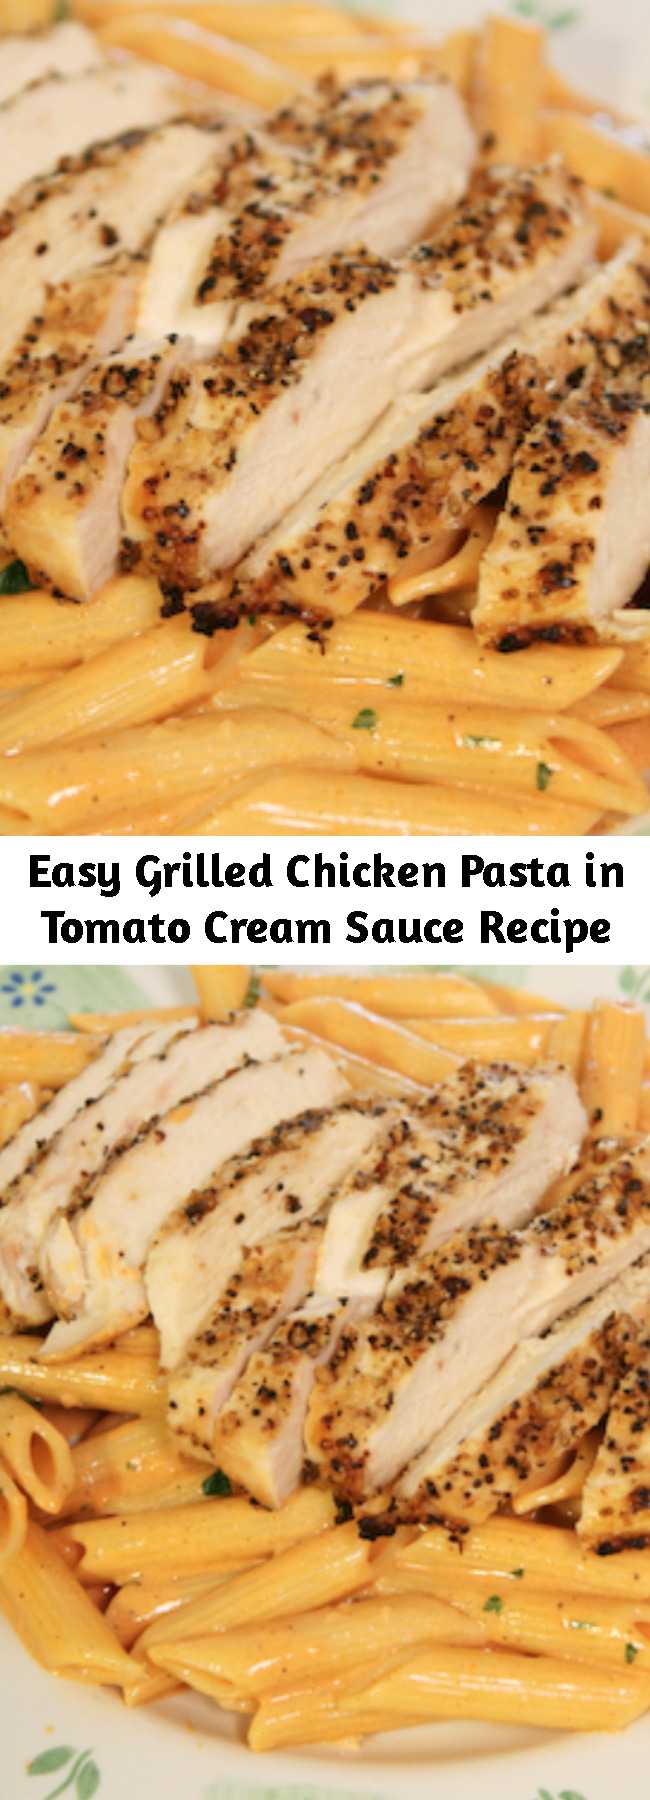 Easy Grilled Chicken Pasta in Tomato Cream Sauce Recipe - This Grilled Chicken Pasta in Tomato Cream Sauce recipe always tastes like it was made by a professional chef! Luckily, this is one dish that anyone can pull off!